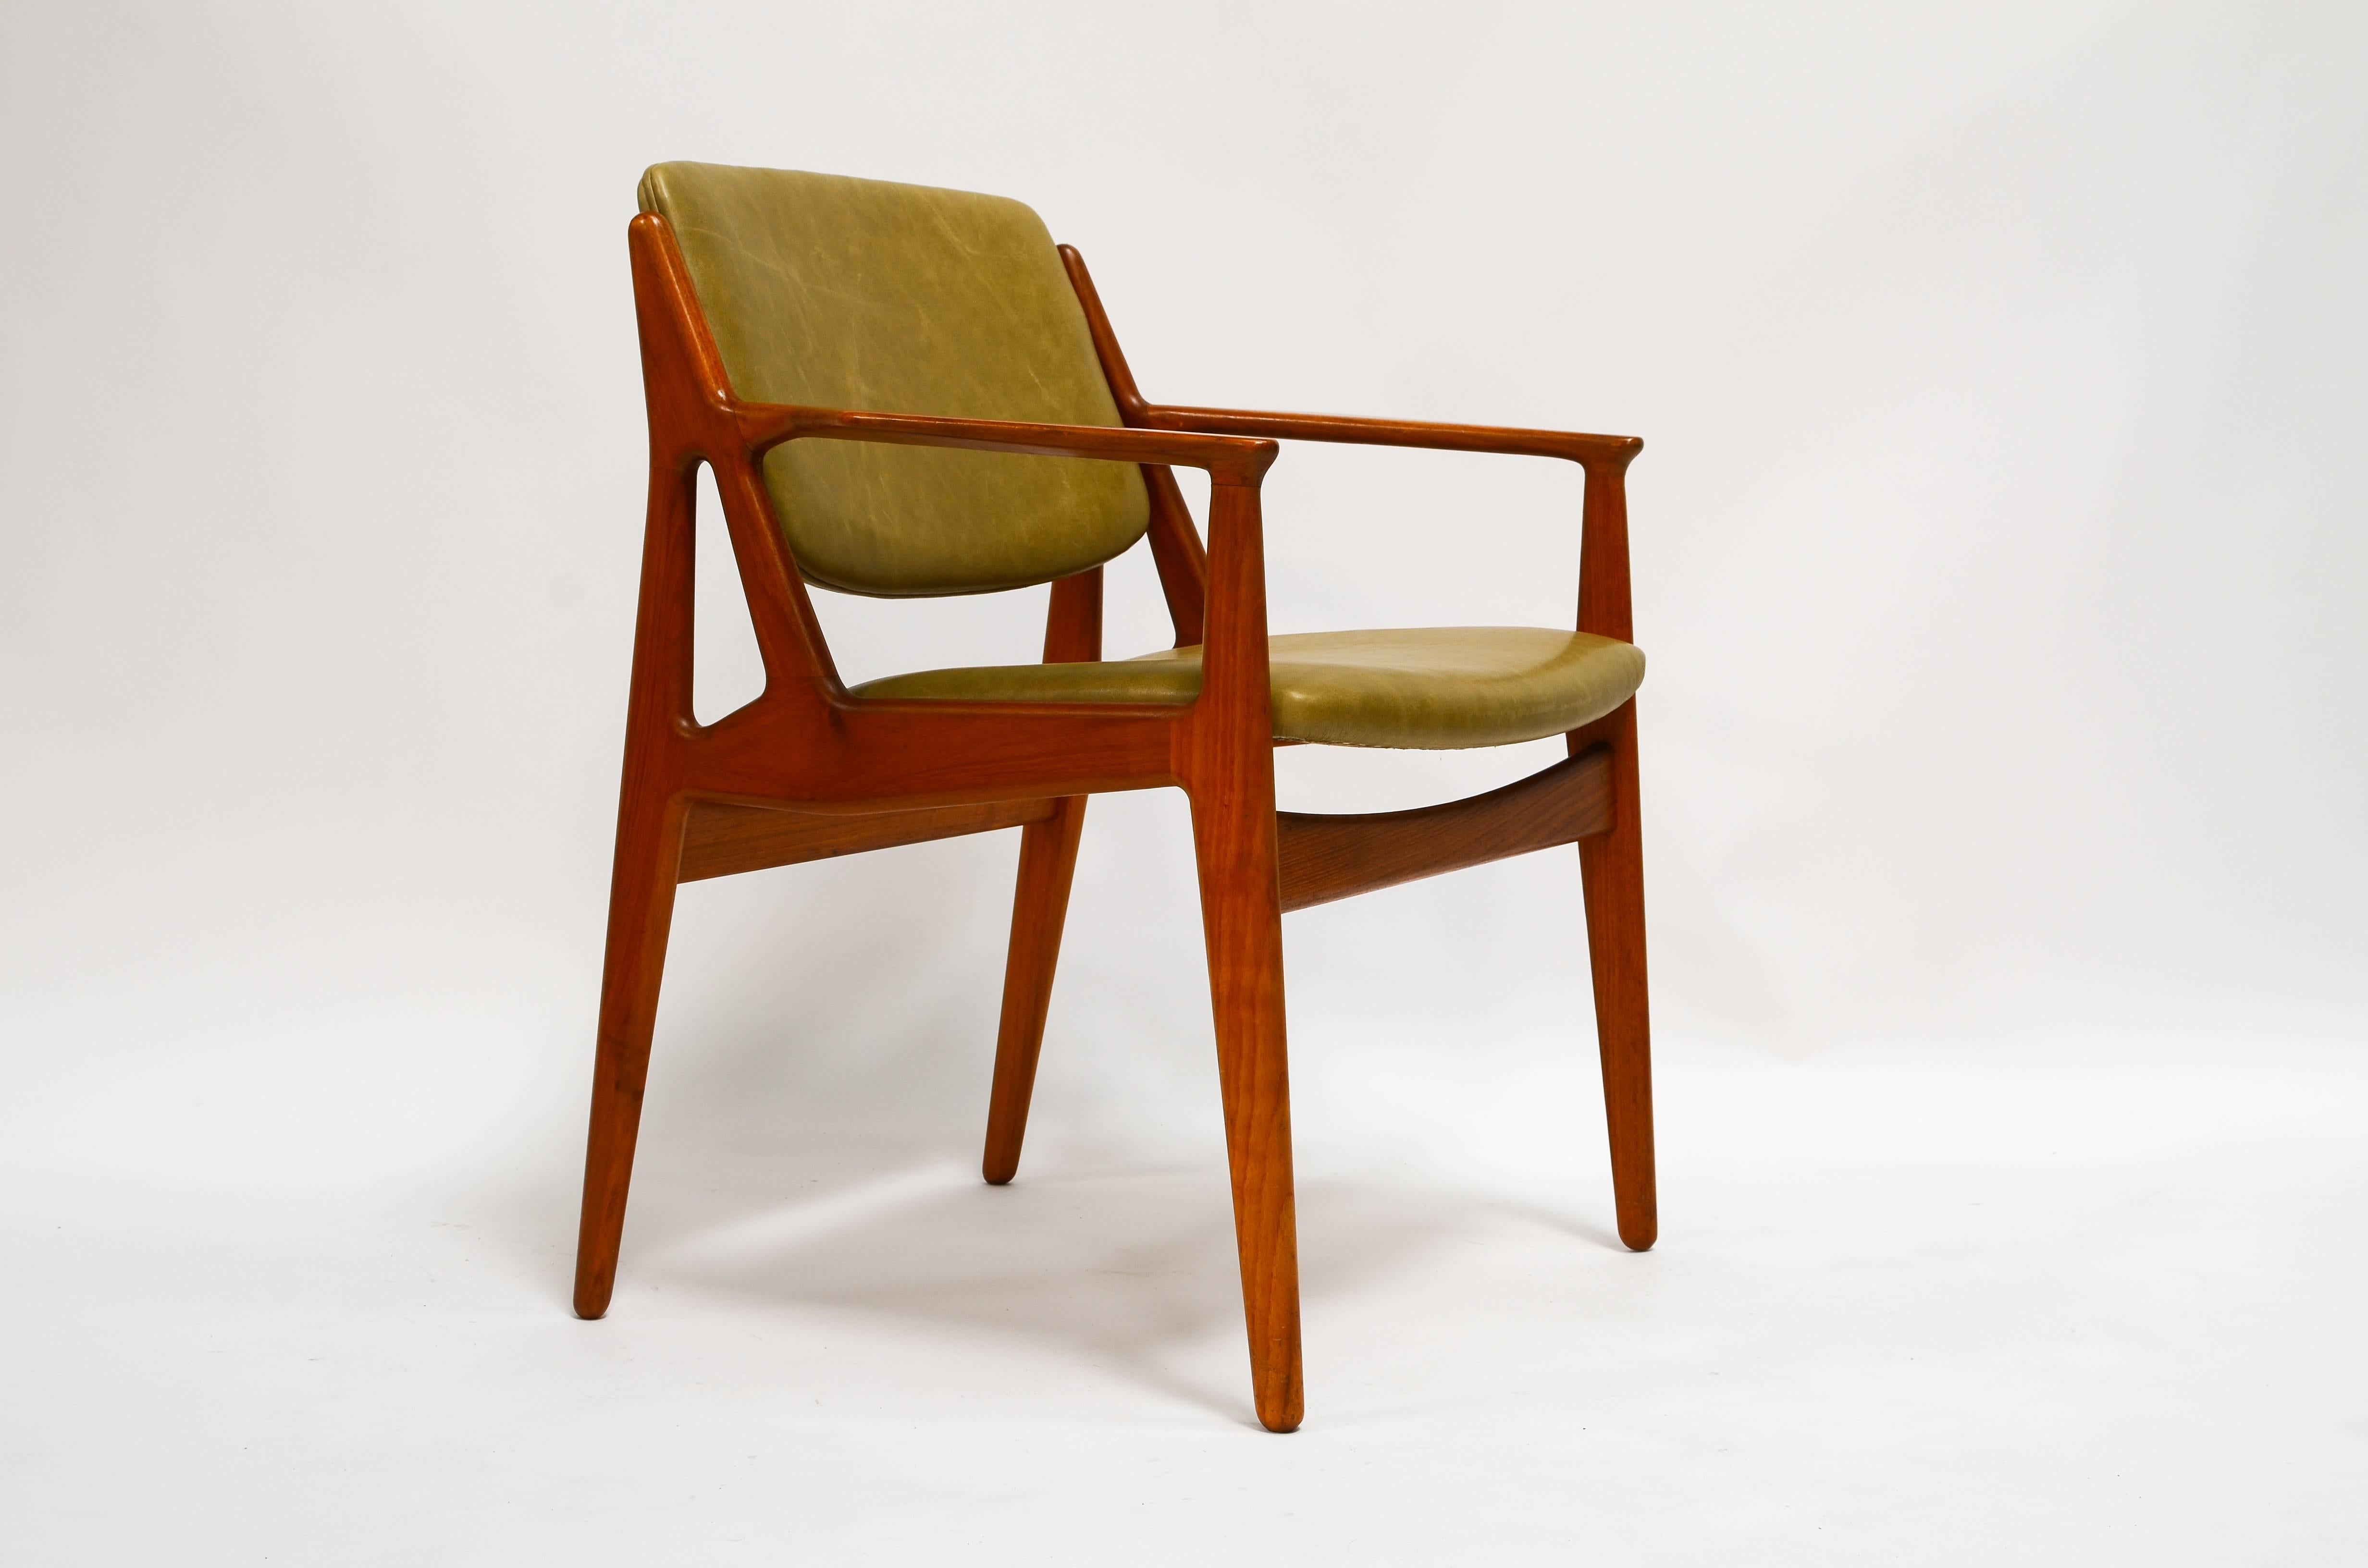 Offered is a single teak Danish Modern armchair designed by Arne Vodder c.1962. A well executed design featuring a “swivel back” and sculpted arms. Vodder designed the back to swivel/pivot so it forms to your back for extra comfort.  Restored with